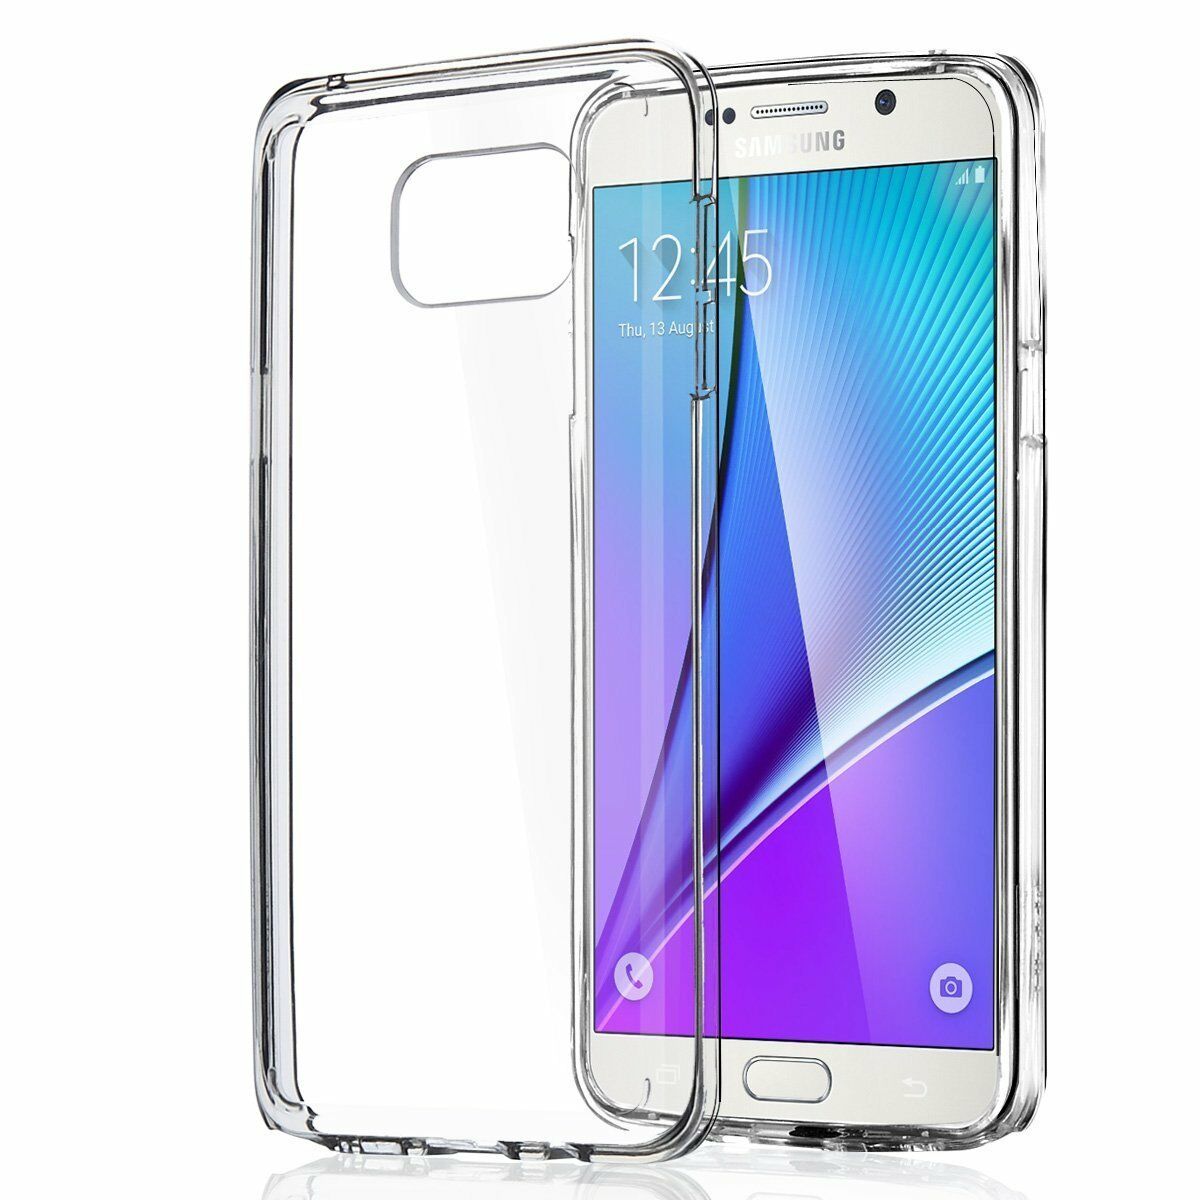 I Jelly Metal Samsung Note 5 Protective Cover Skin Tone